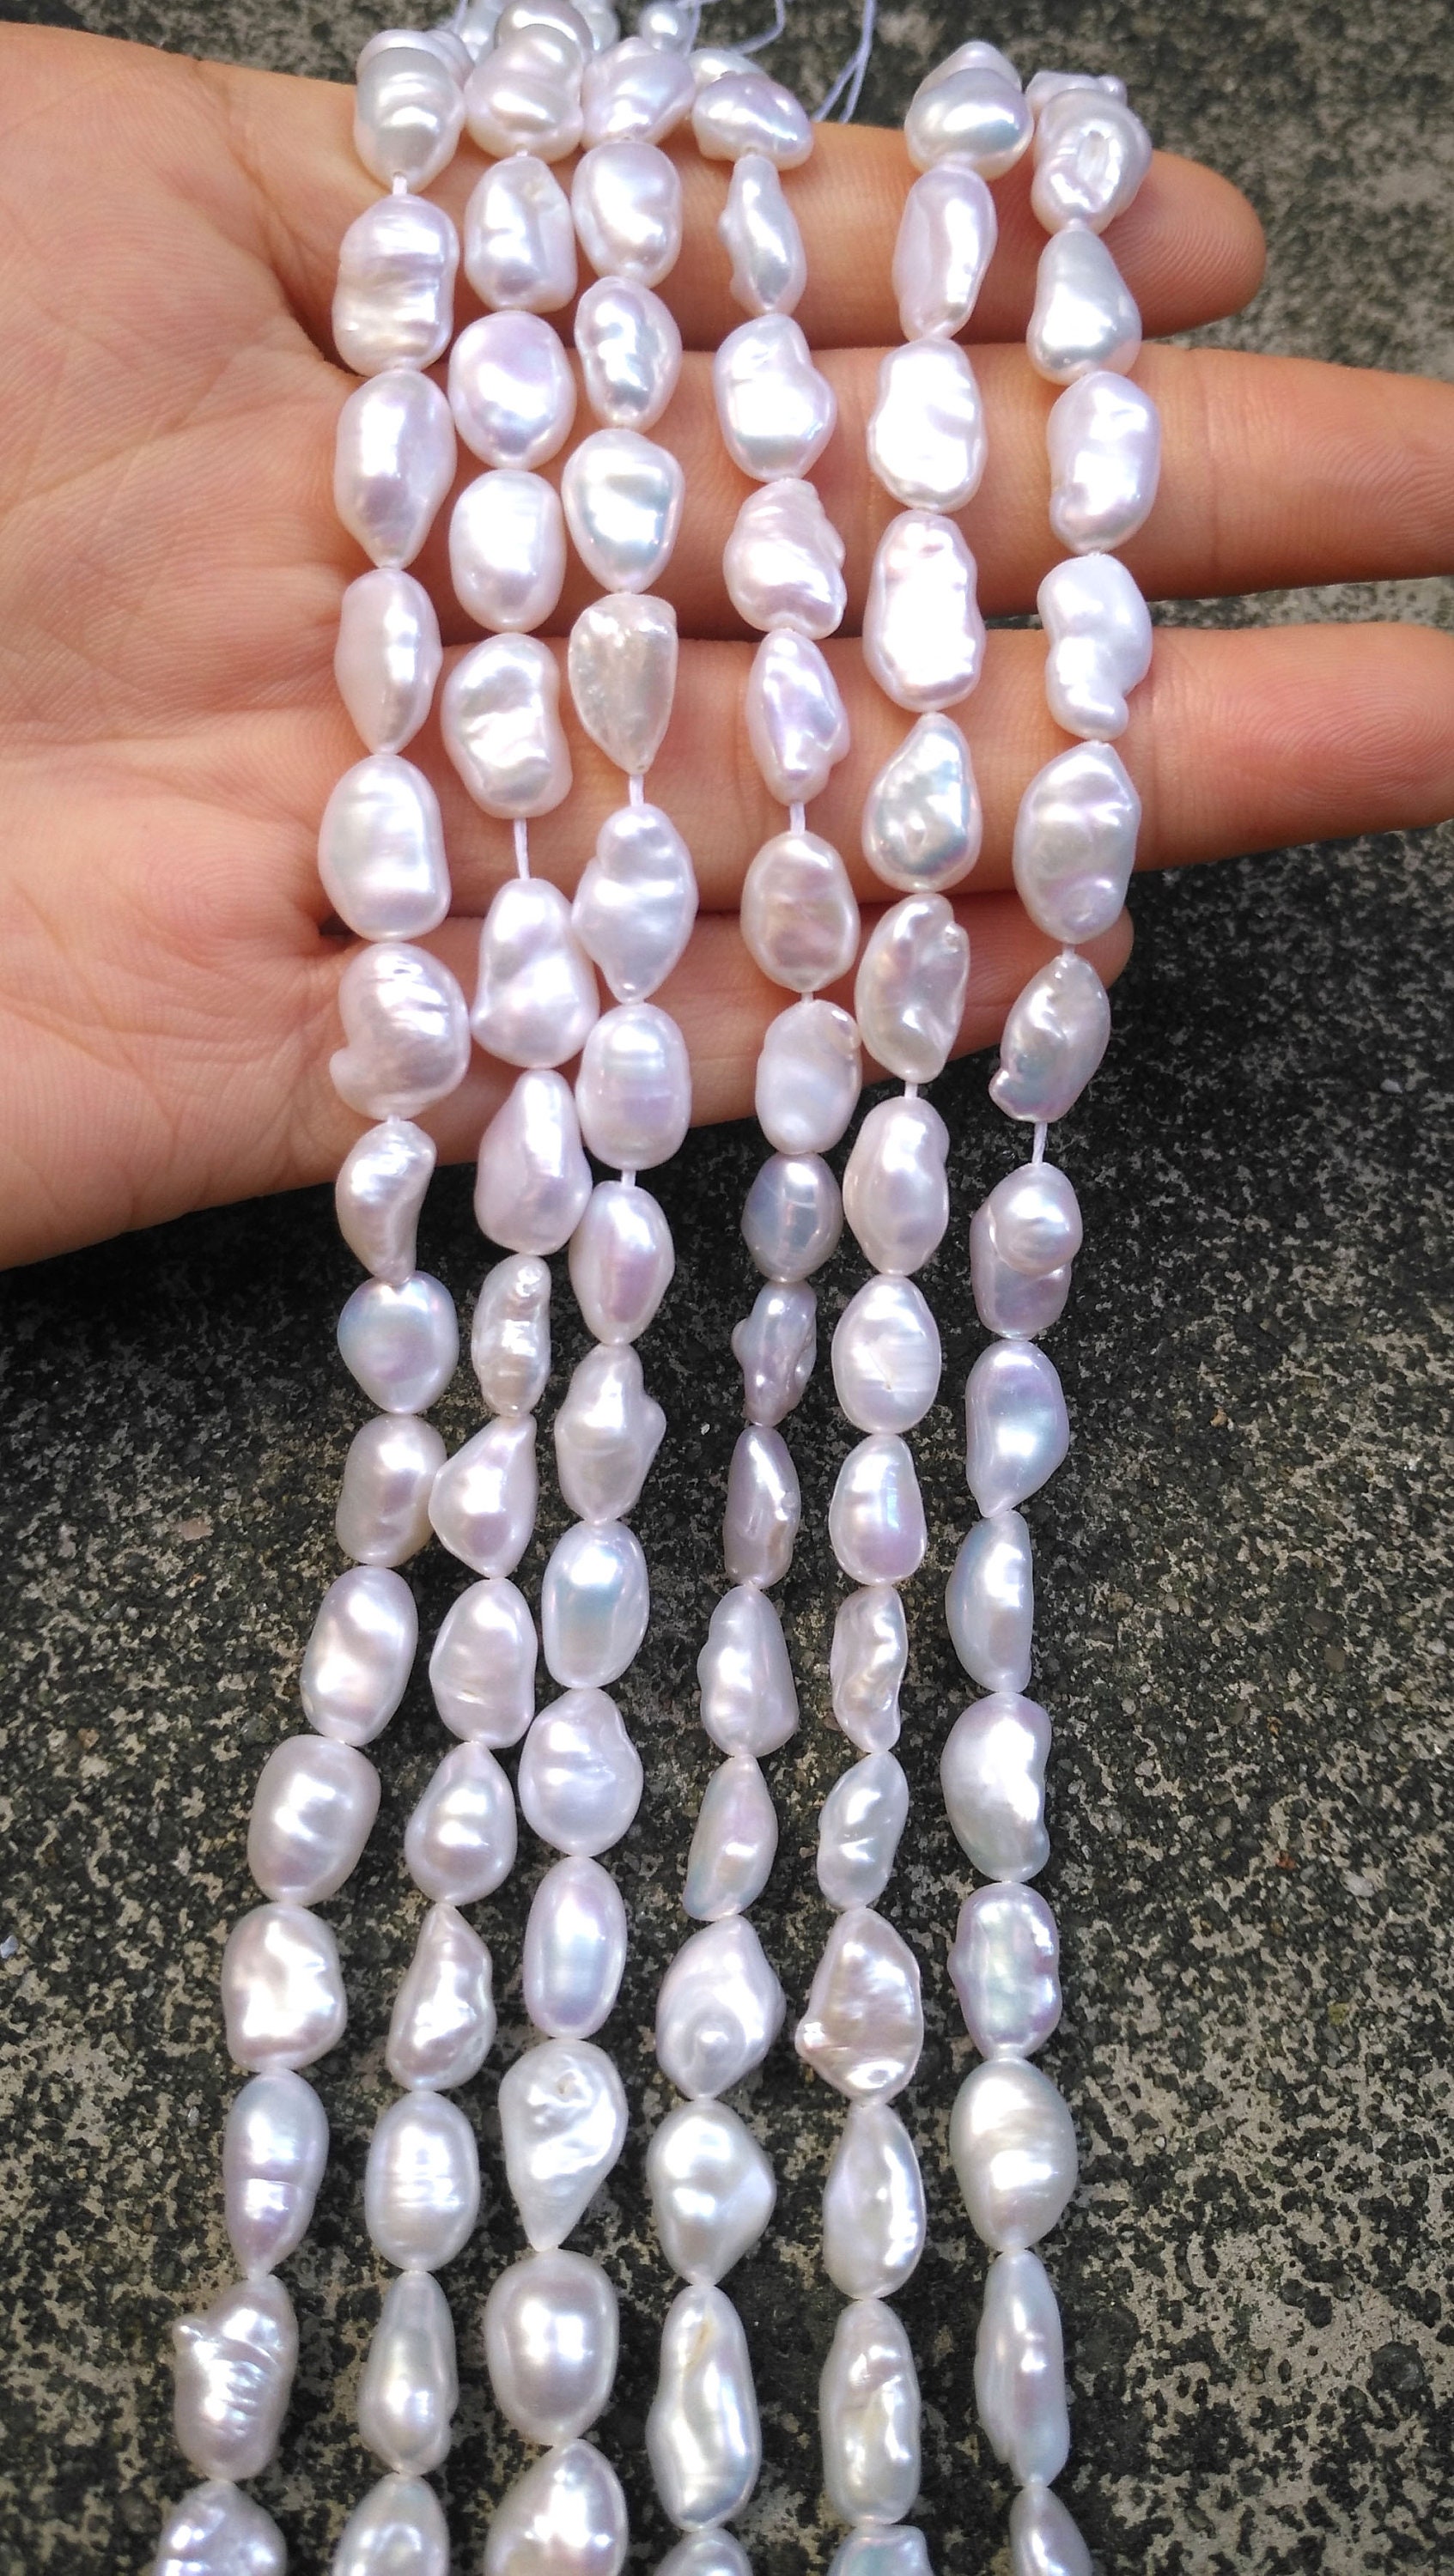 Cultured Natural Freshwater Pearl String 3mm-8mm Beads Wholesale Round  White Pearl Jewelry - AliExpress